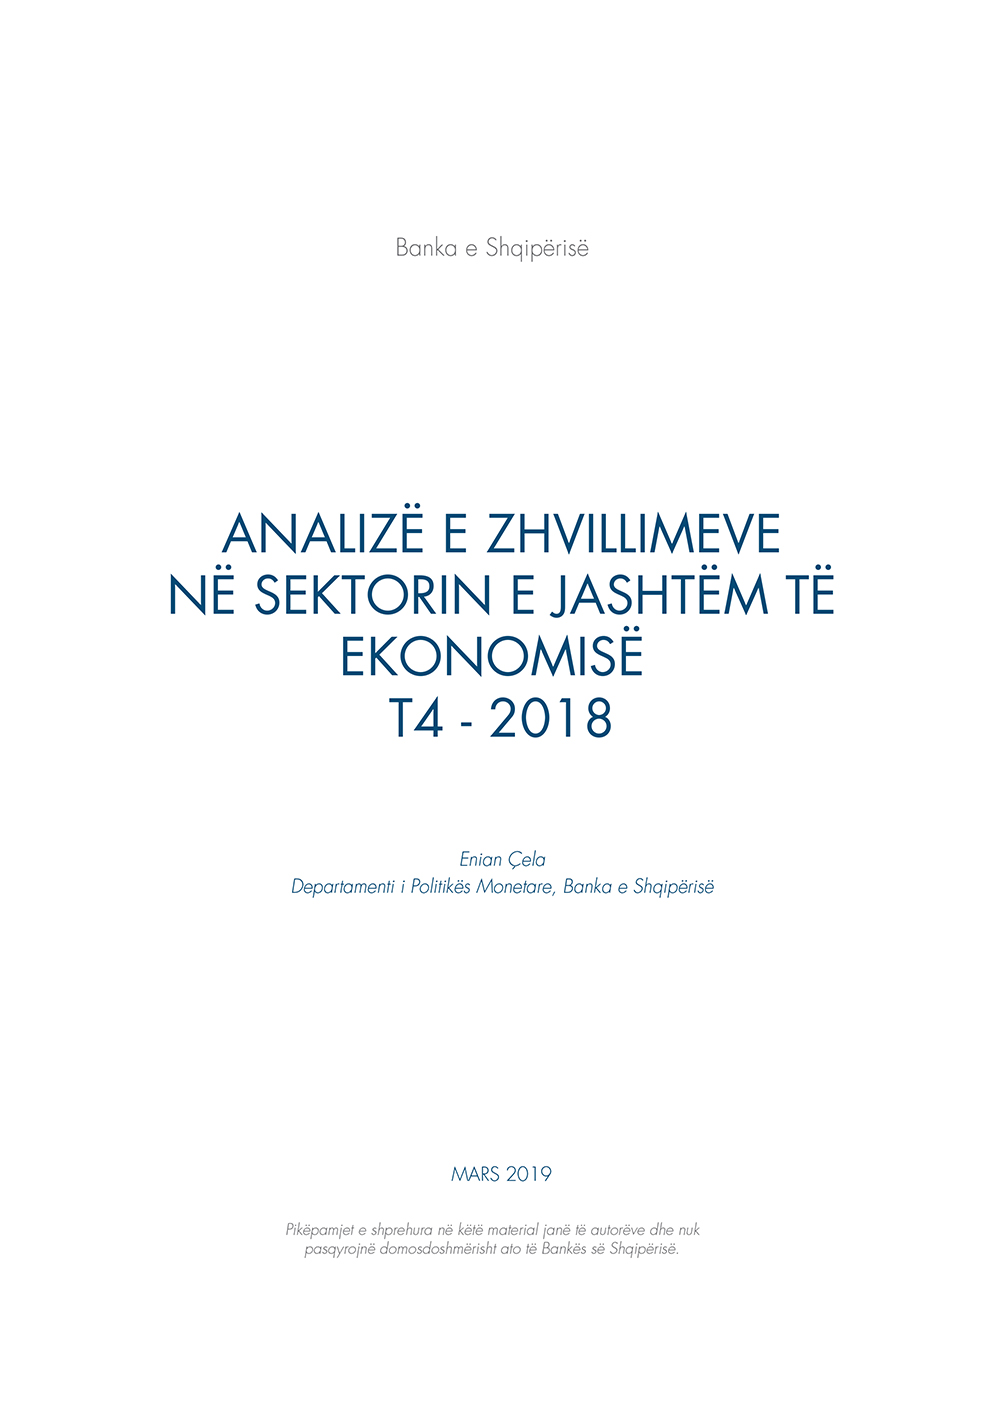 Analysis of developments in the external sector of the economy 2018 Q4